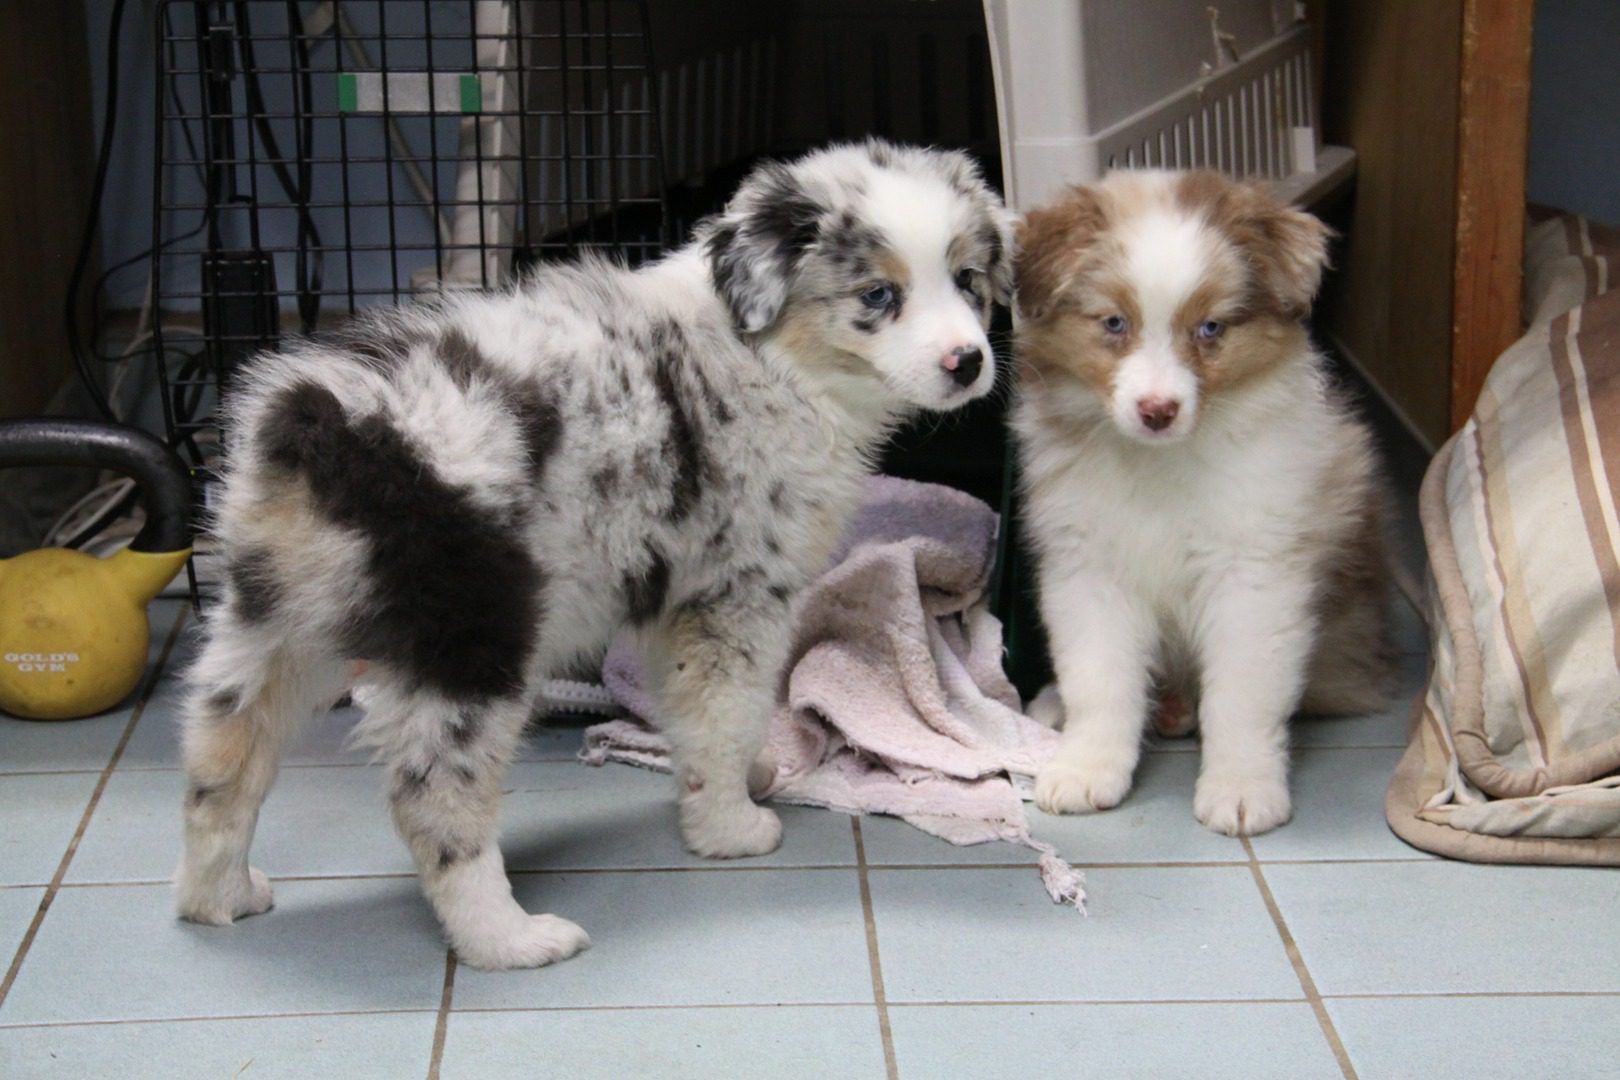 A black and white Australian puppy and a brown and white aussie puppy